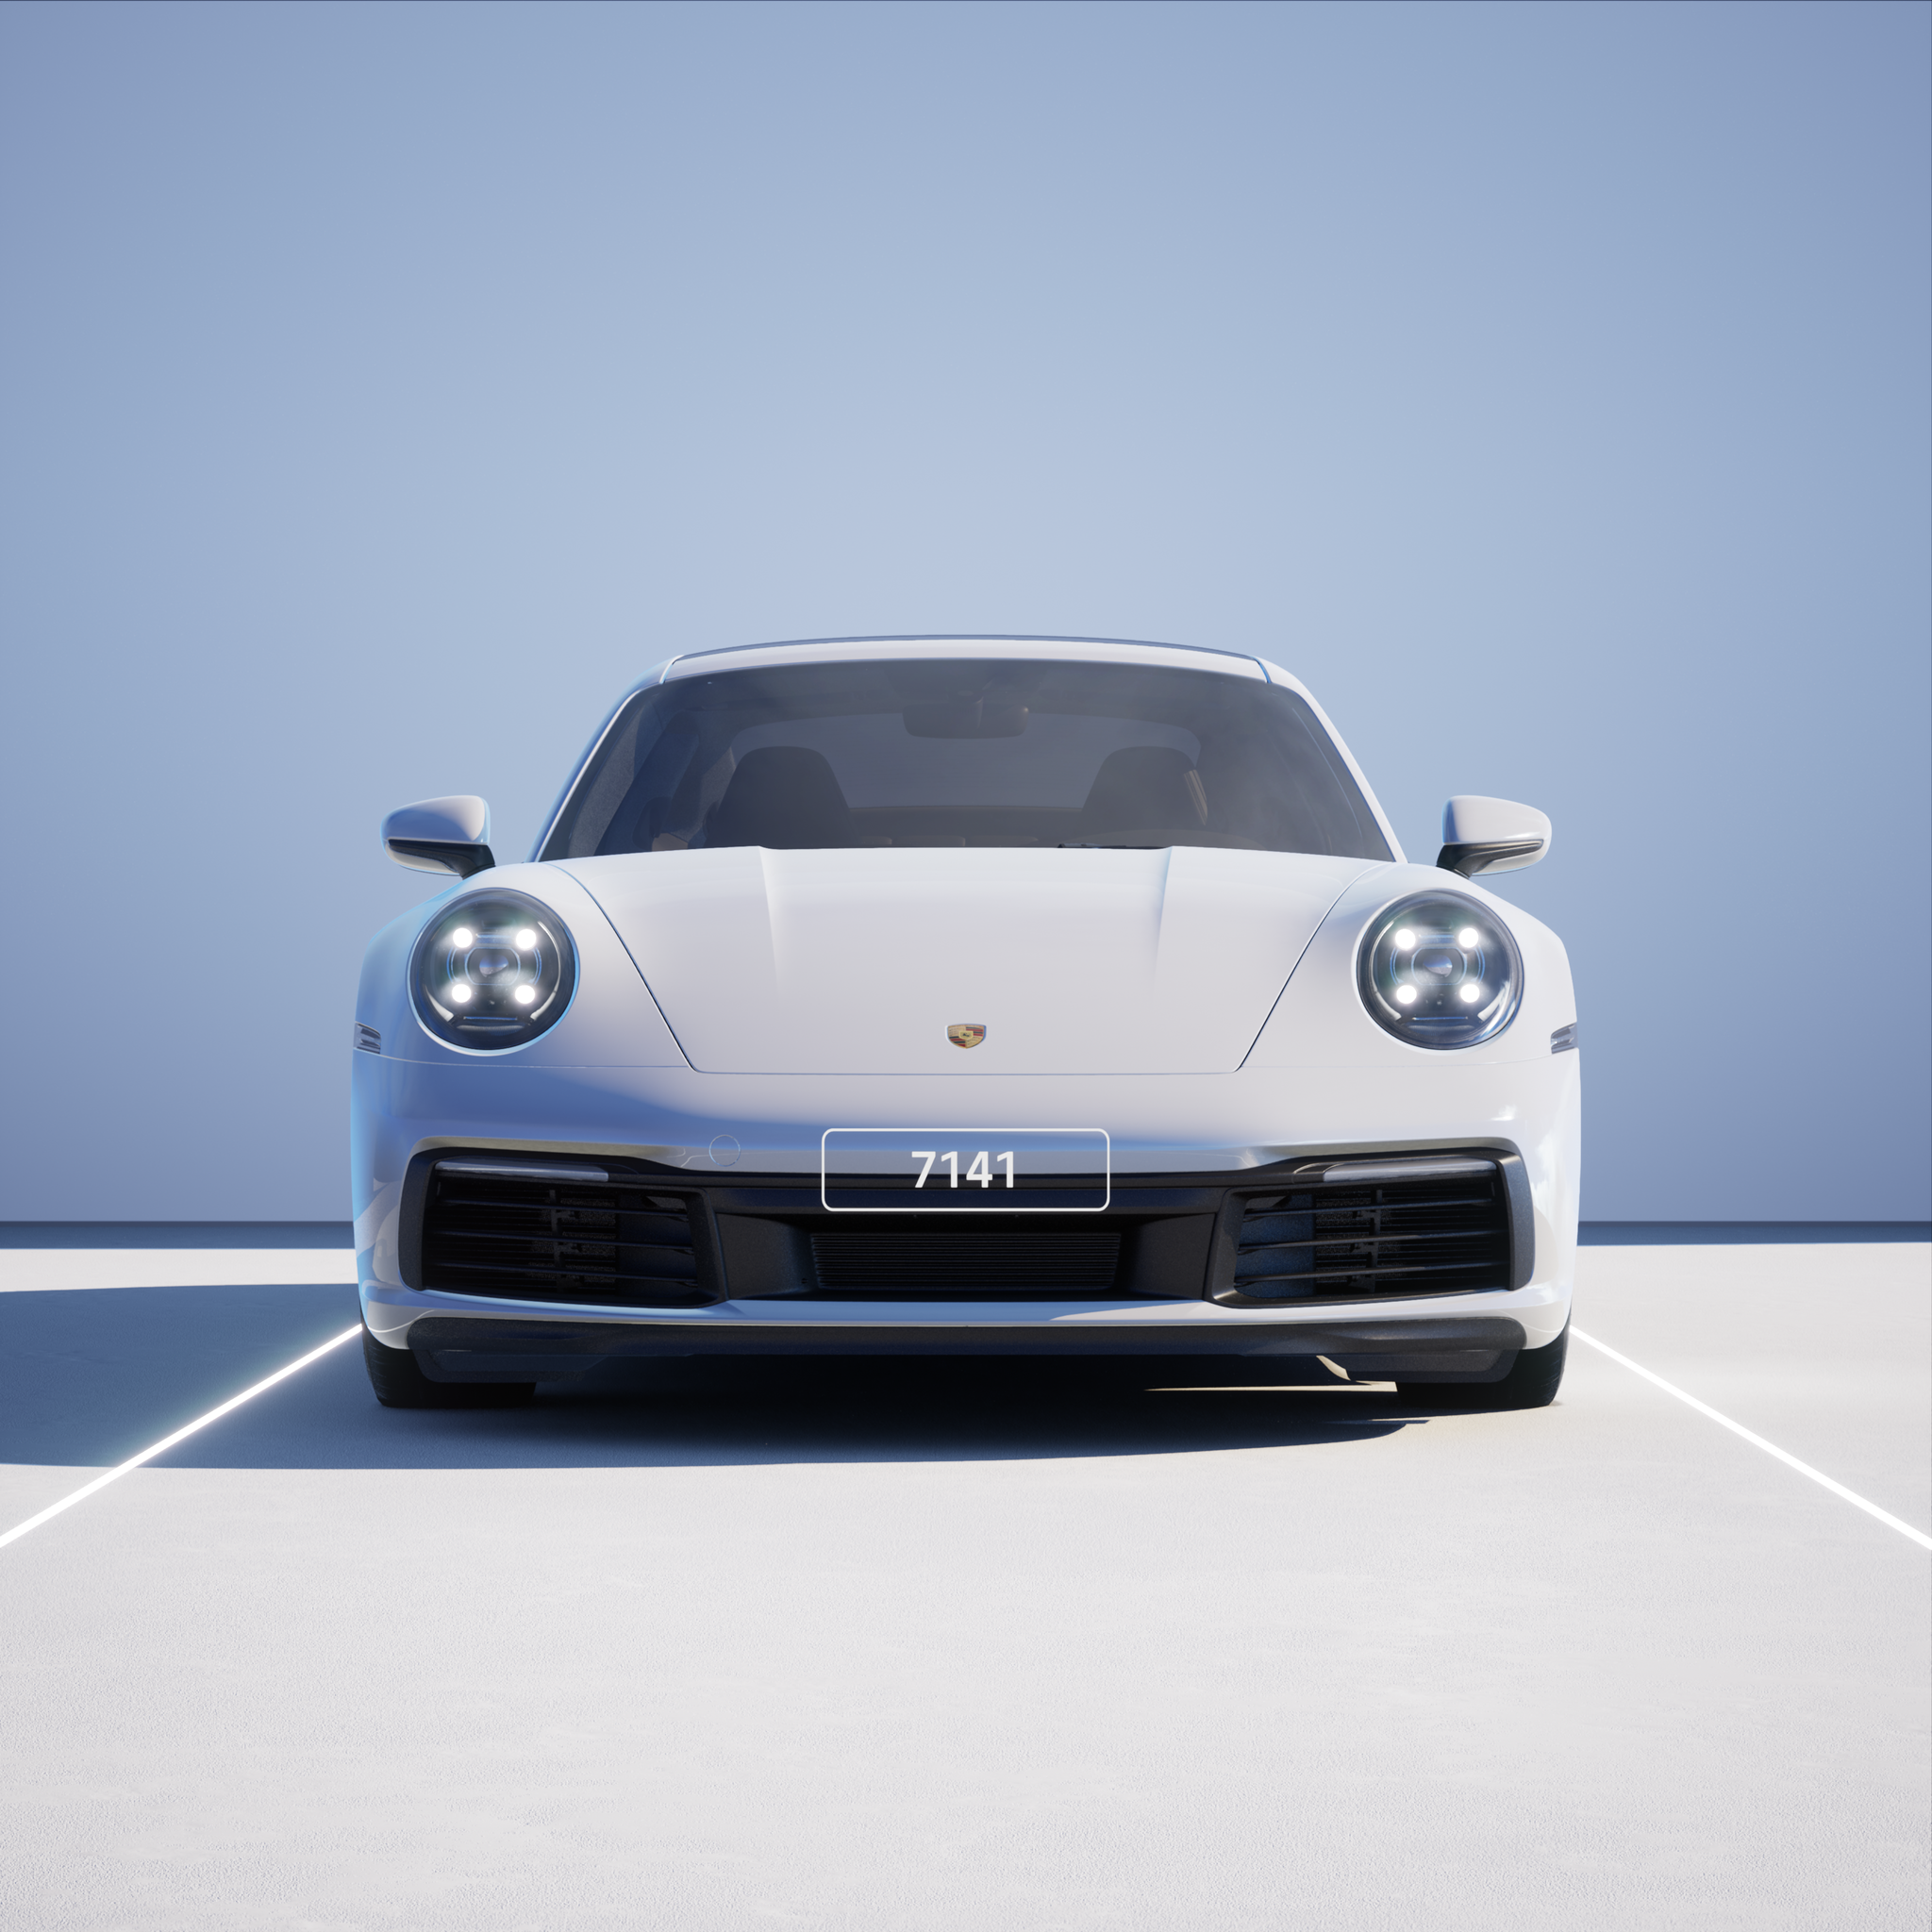 The PORSCHΞ 911 7141 image in phase